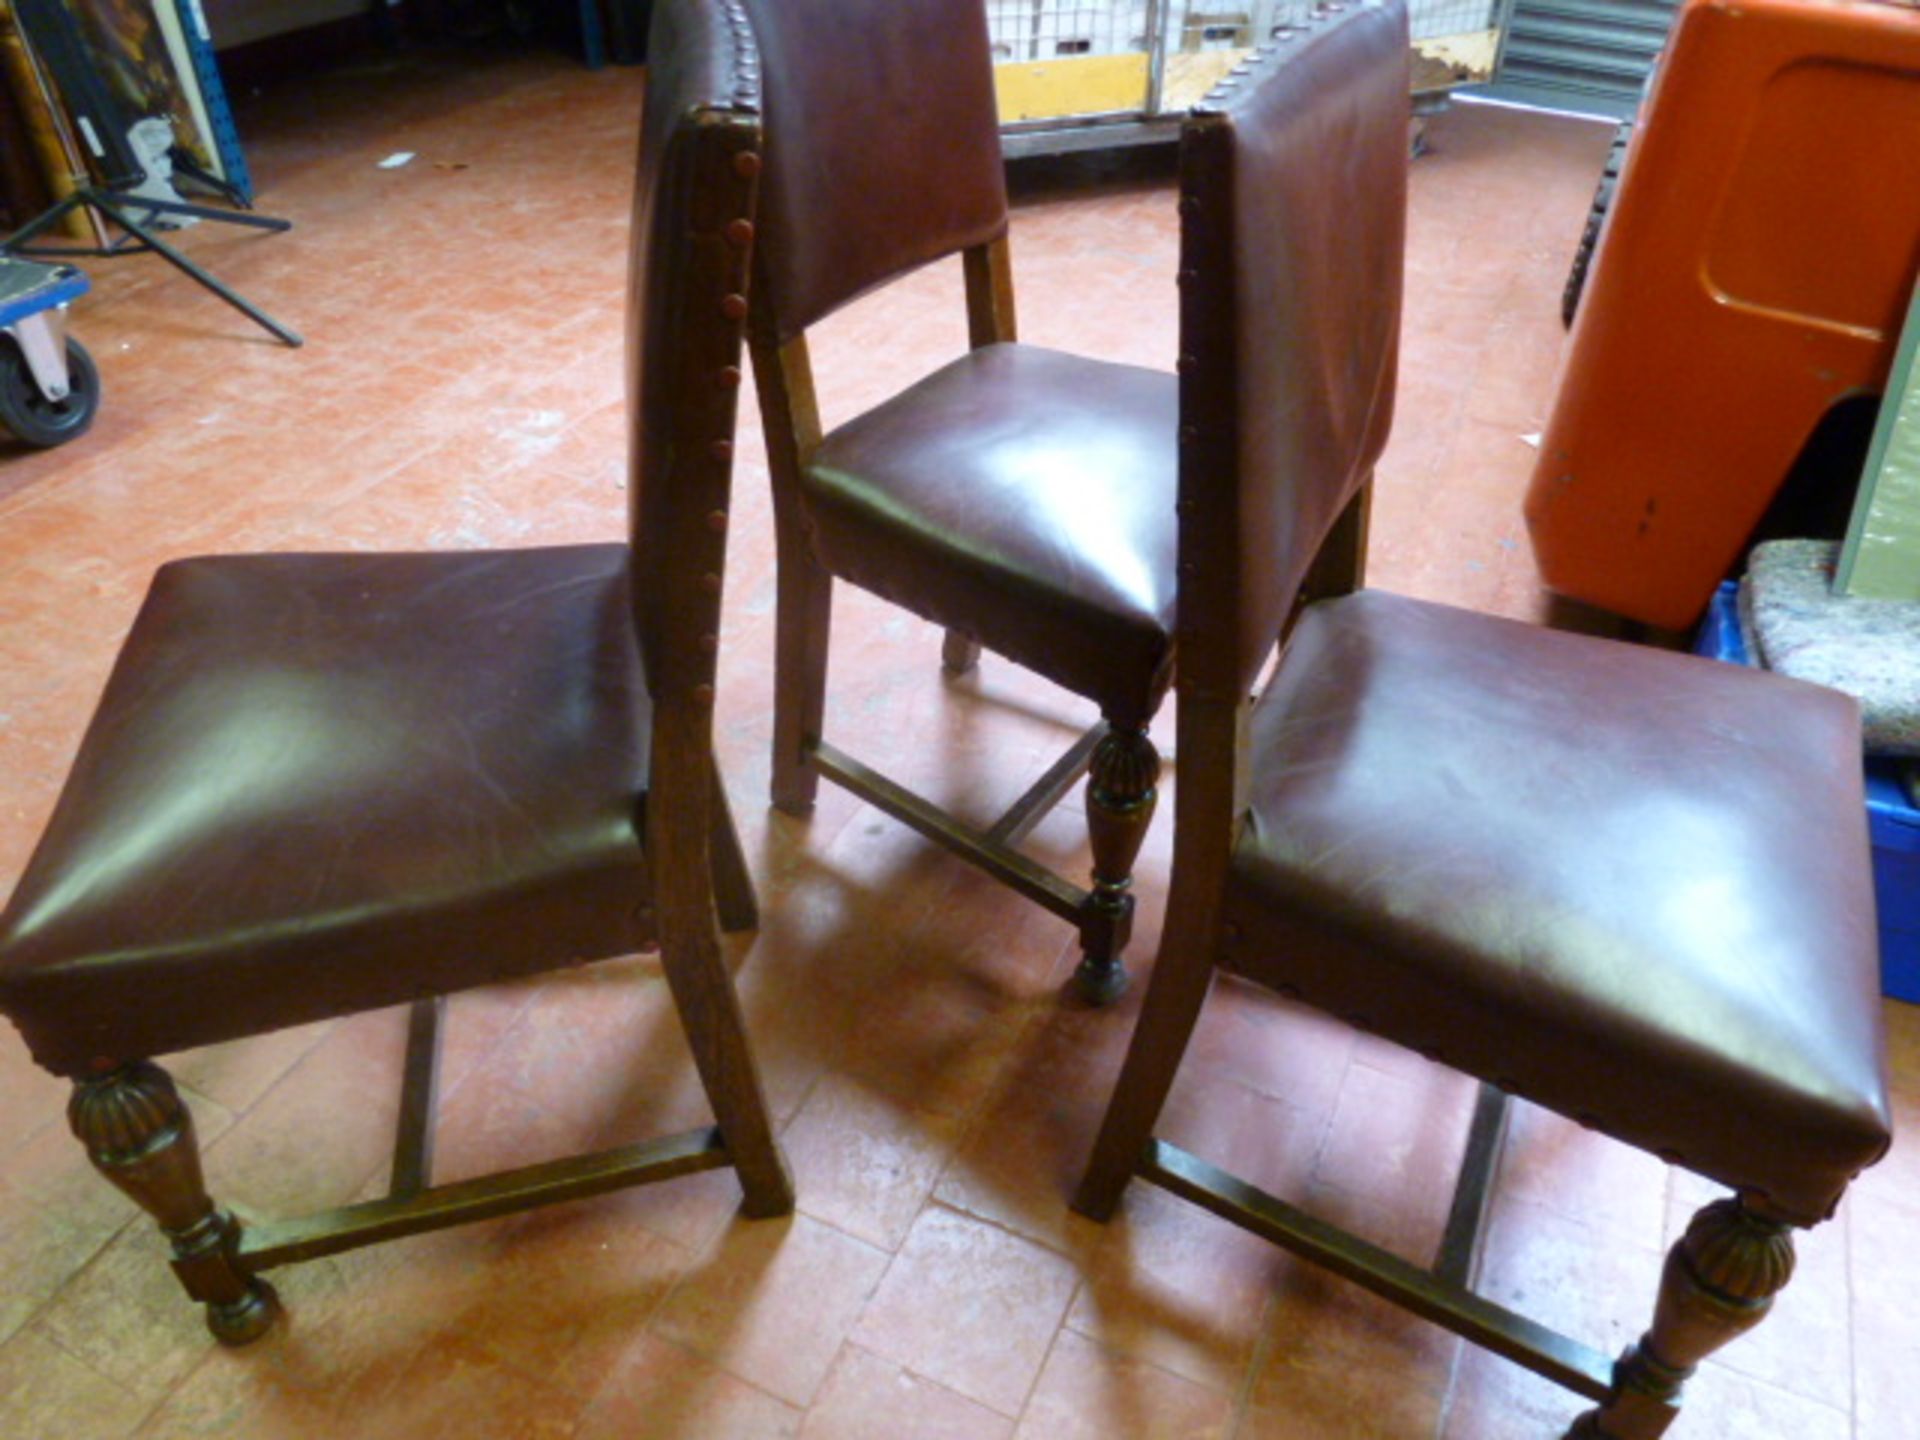 3 x Matching Early Wood Chairs with Dark Red Leather & Stud Detail. - Image 3 of 5